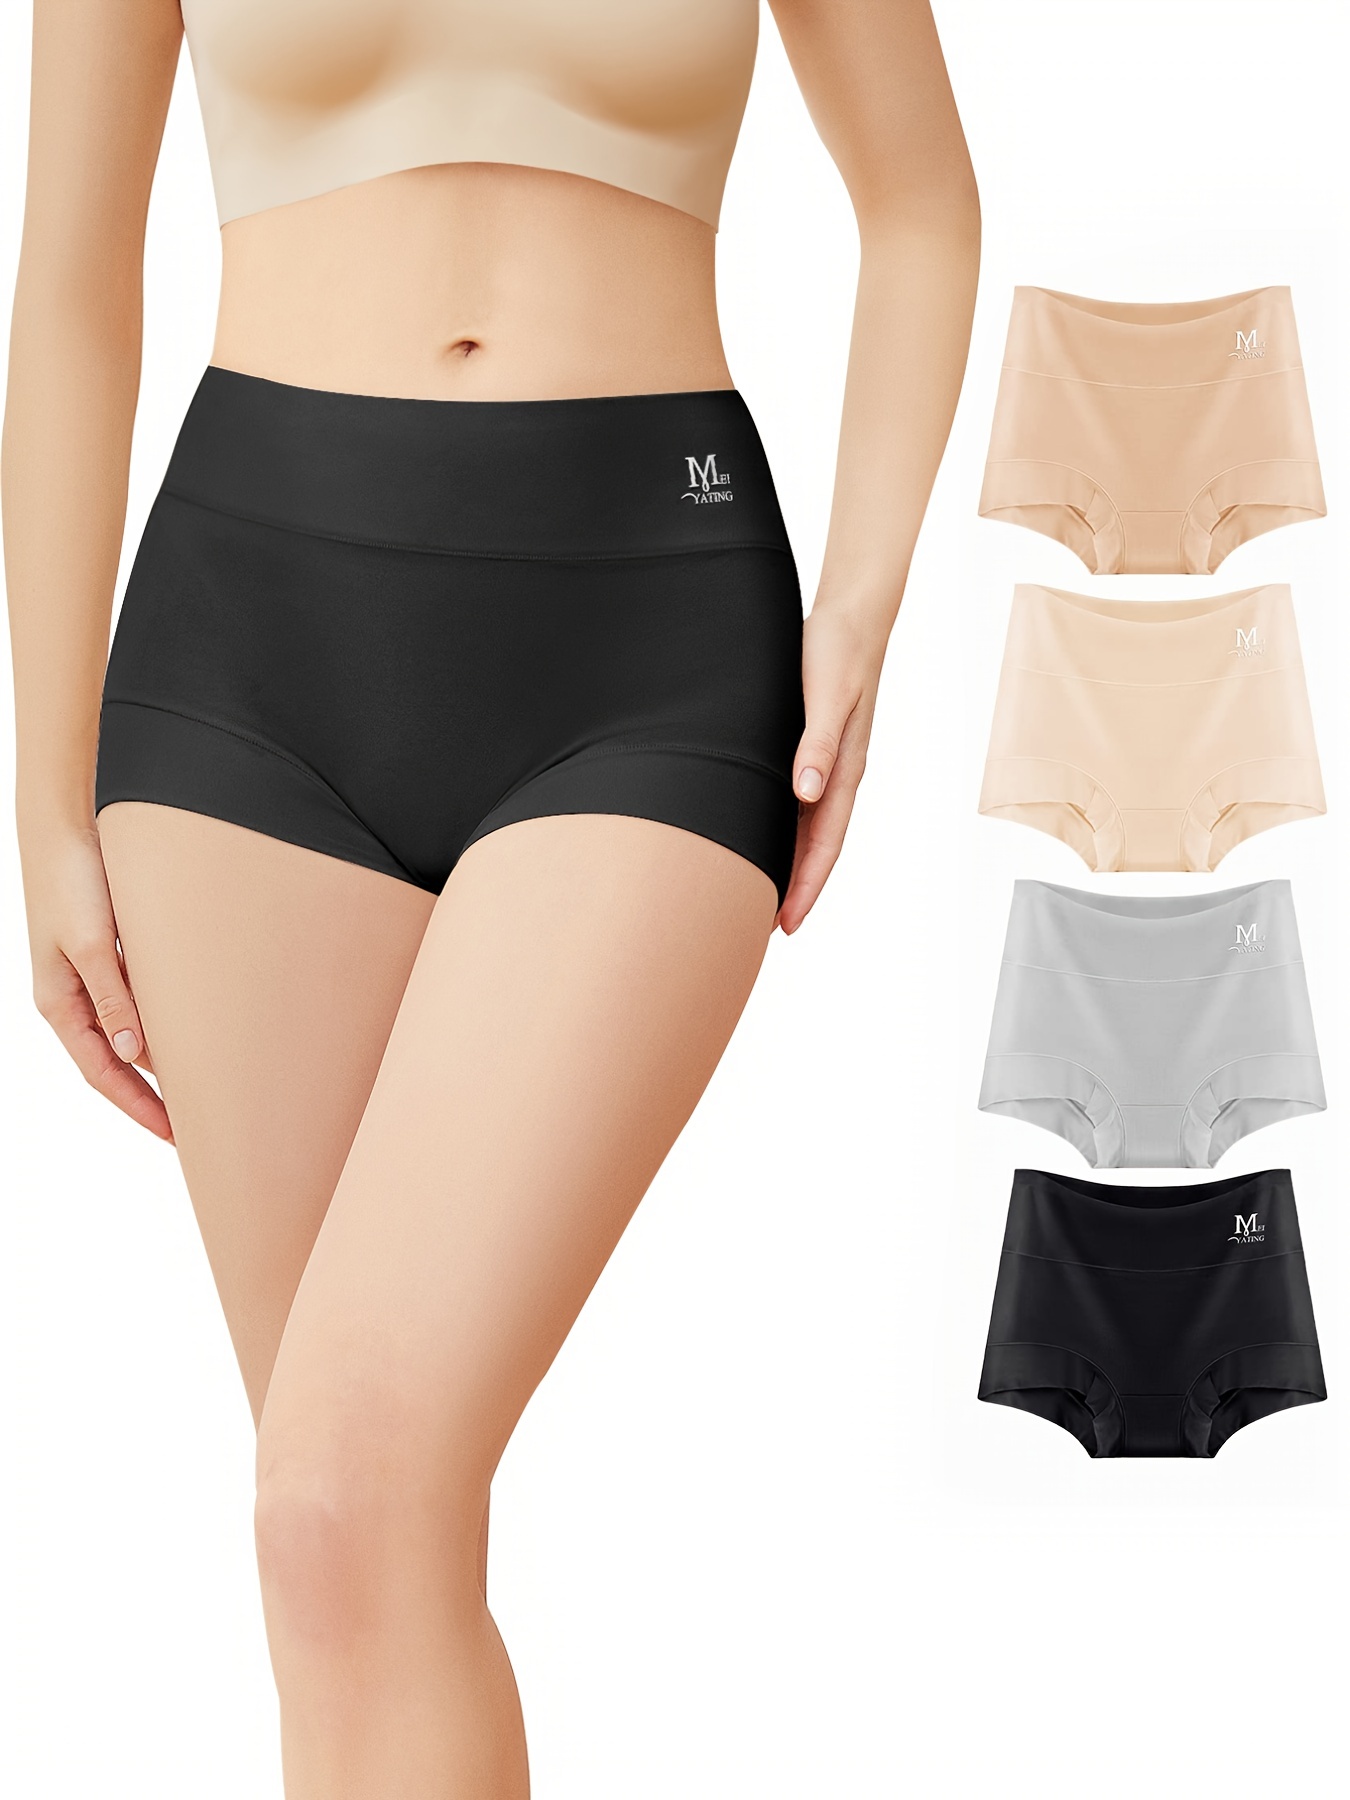 MYO Boyshort panties for women/Sorty/Solid Hipster Inner Wear Panty/ High  Rise Full Brief Cotton Stretch Full Coverage Panty/ladies, women,girls  underwear/sorty/knickers/boyshorts panties/boy shorts panties/briefs/panties  for girls/ Long panties for